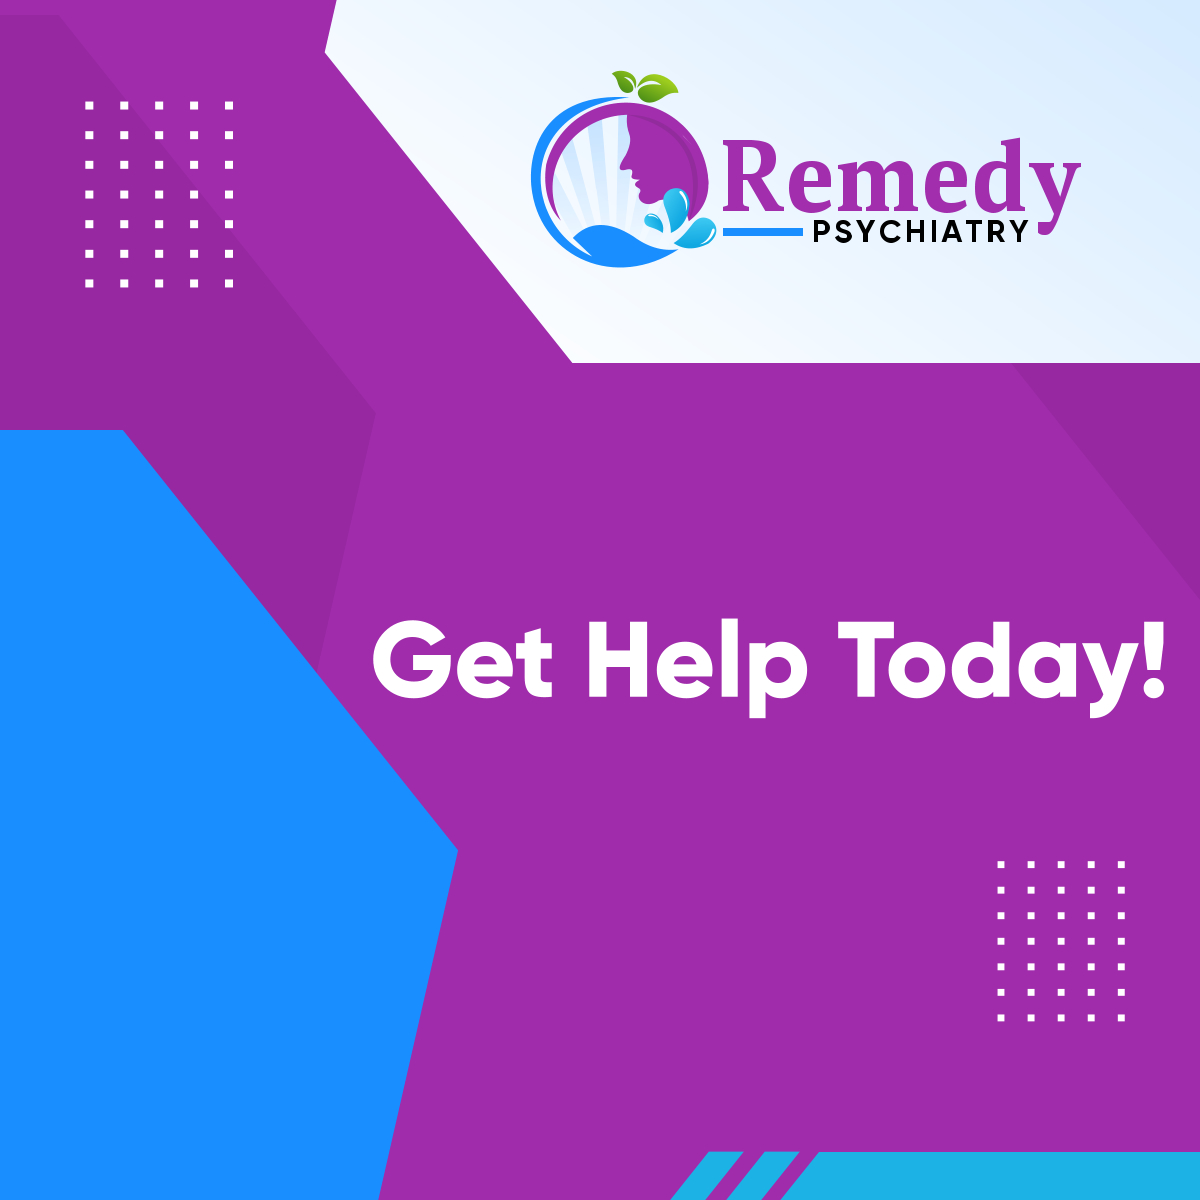 Committing to a professionally supervised therapy program is one of the most helpful moves someone can take in their recovery. Don't go through the recovery process alone. Many people can help you with your situation just like Remedy Psychiatry. Contact us today!

#TherapyProgram